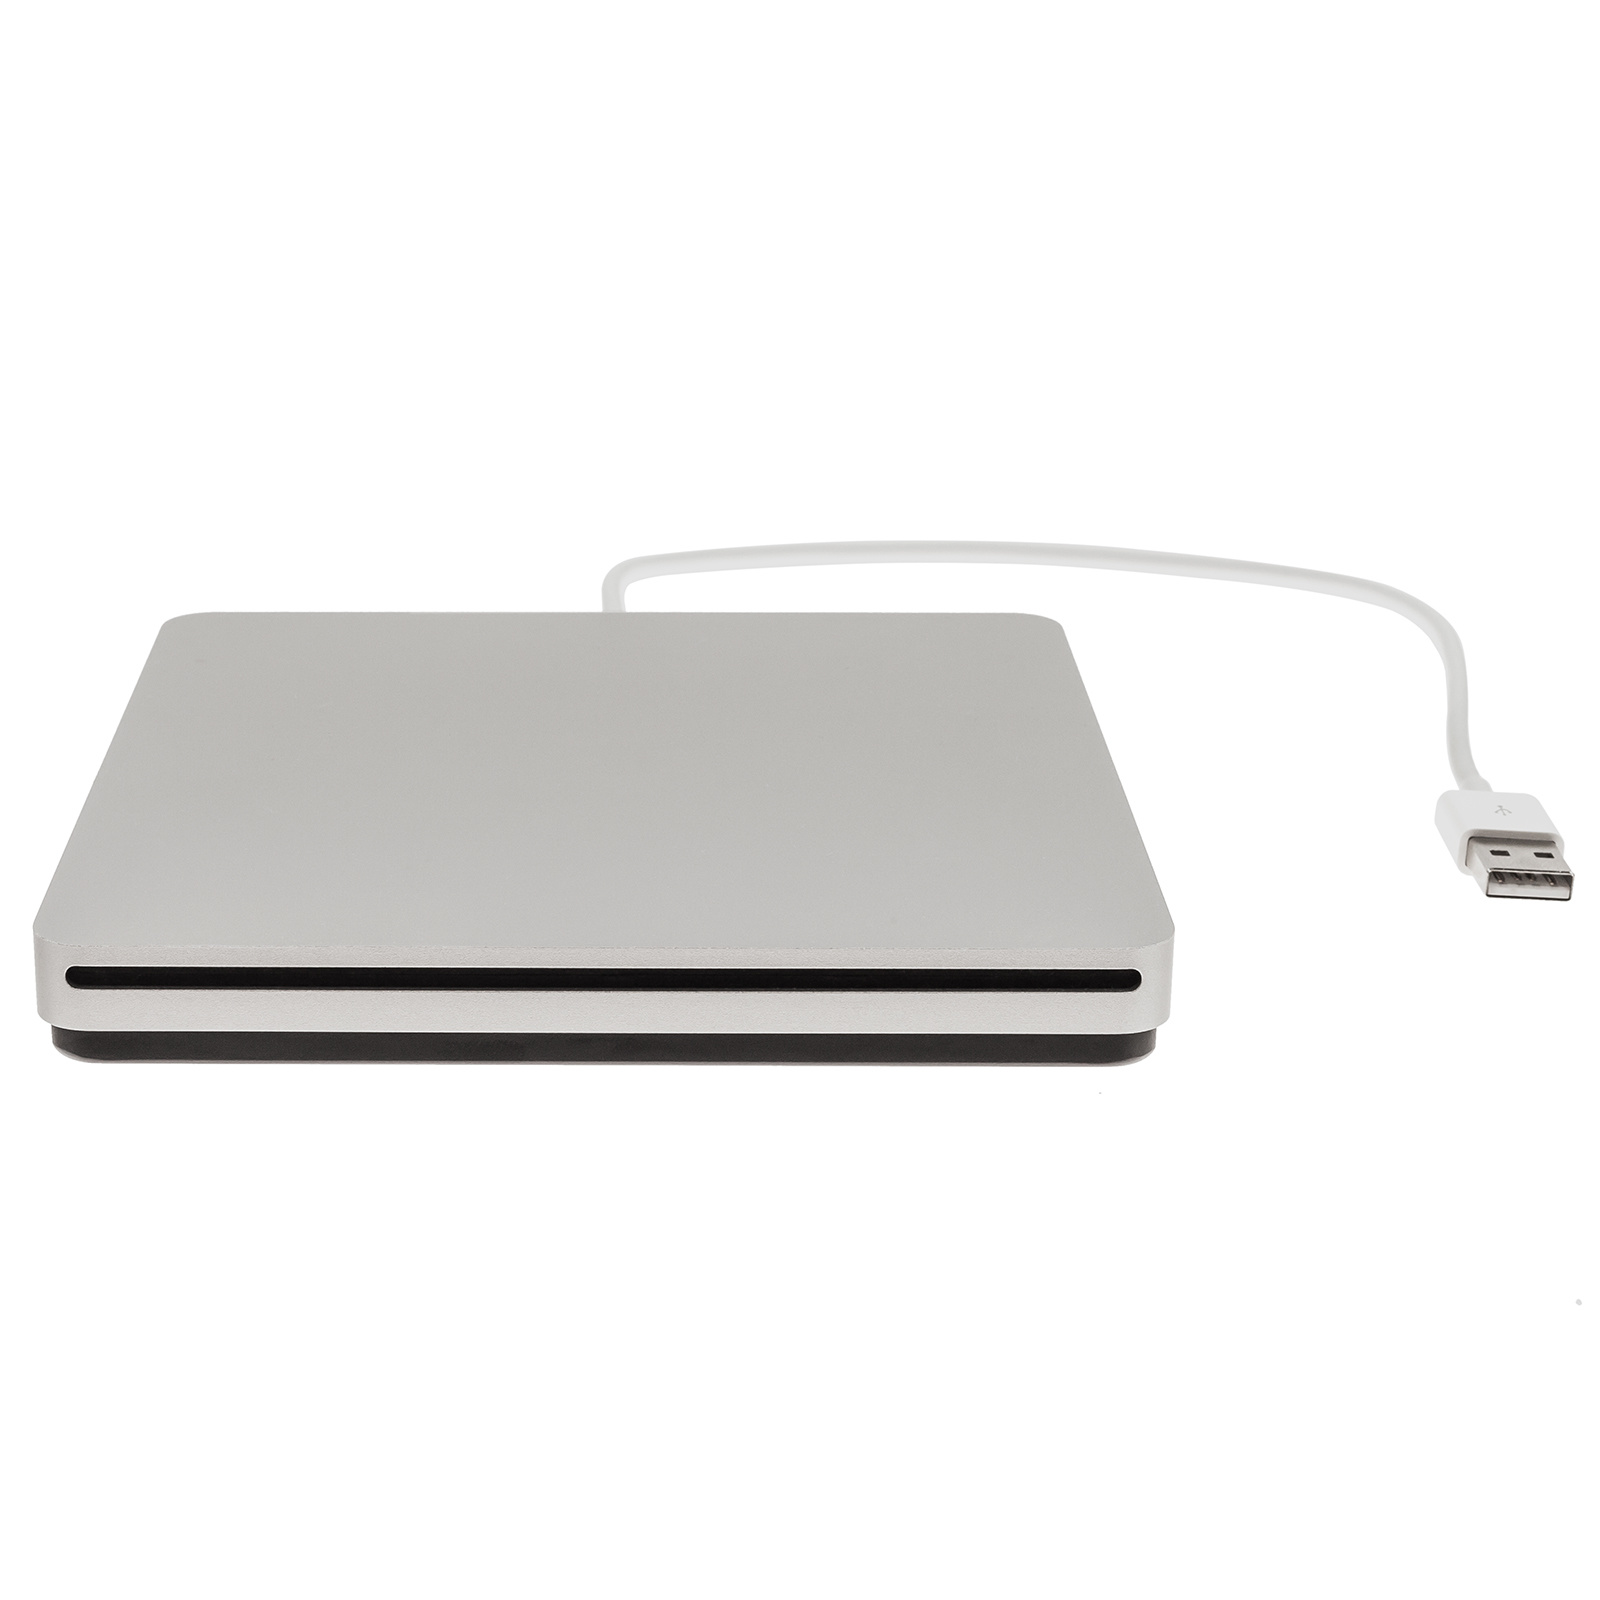 mac usb superdrive drivers for pc